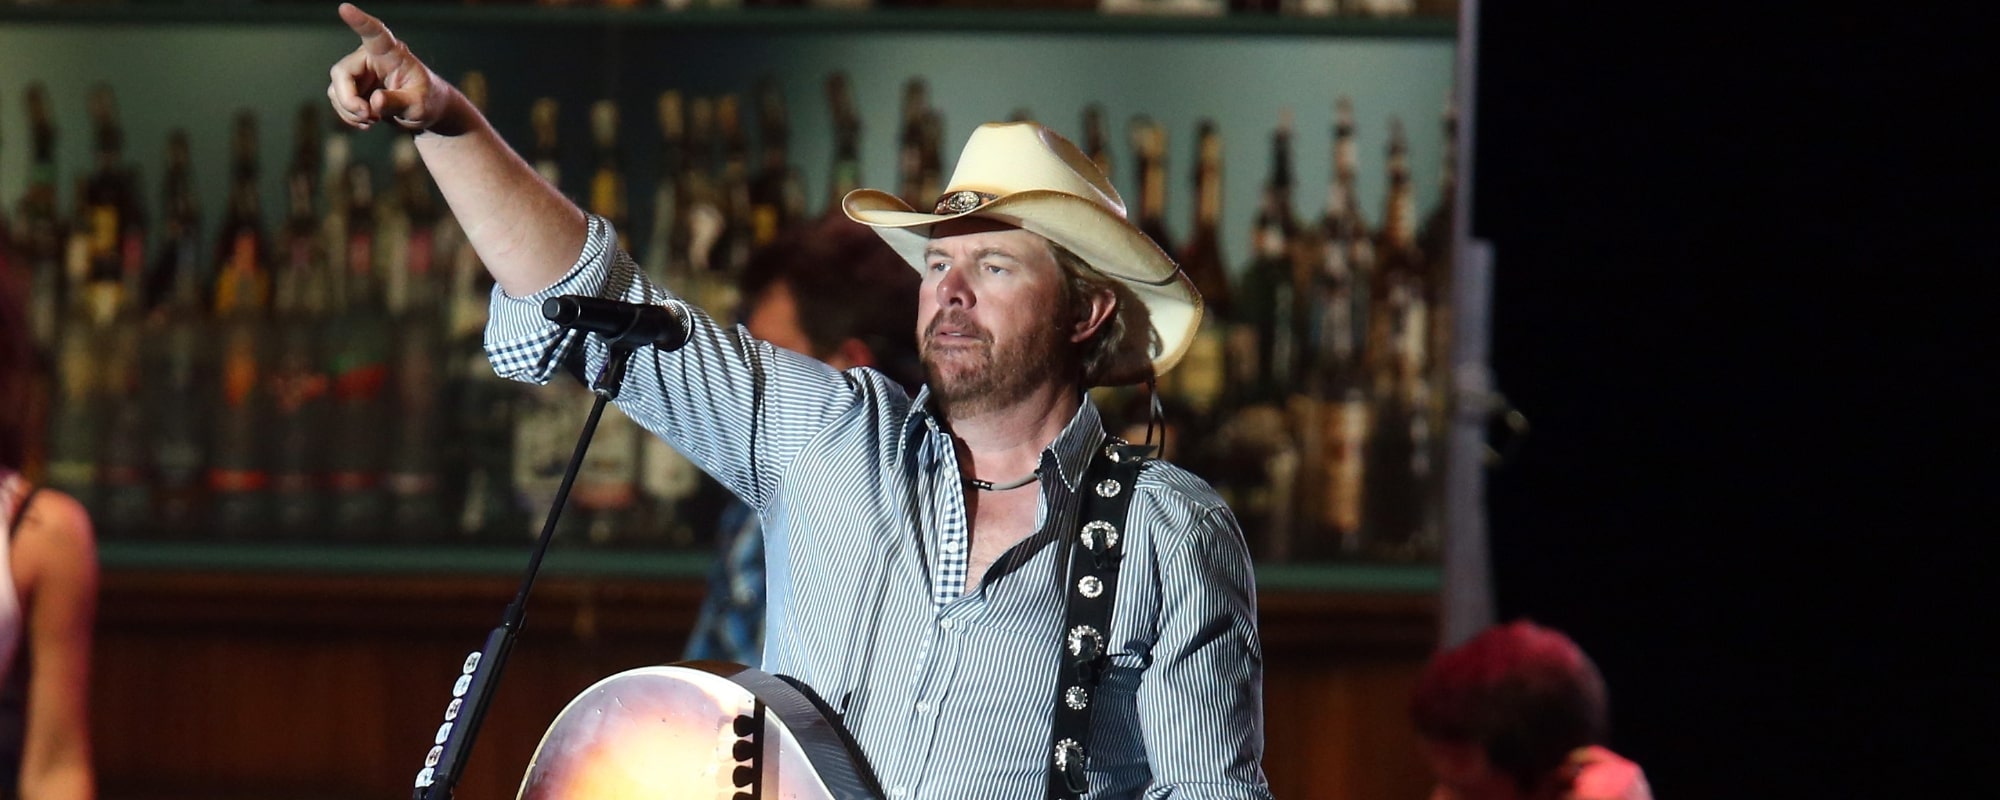 Fans React to Toby Keith’s Posthumous Addition to the Country Music Hall of Fame